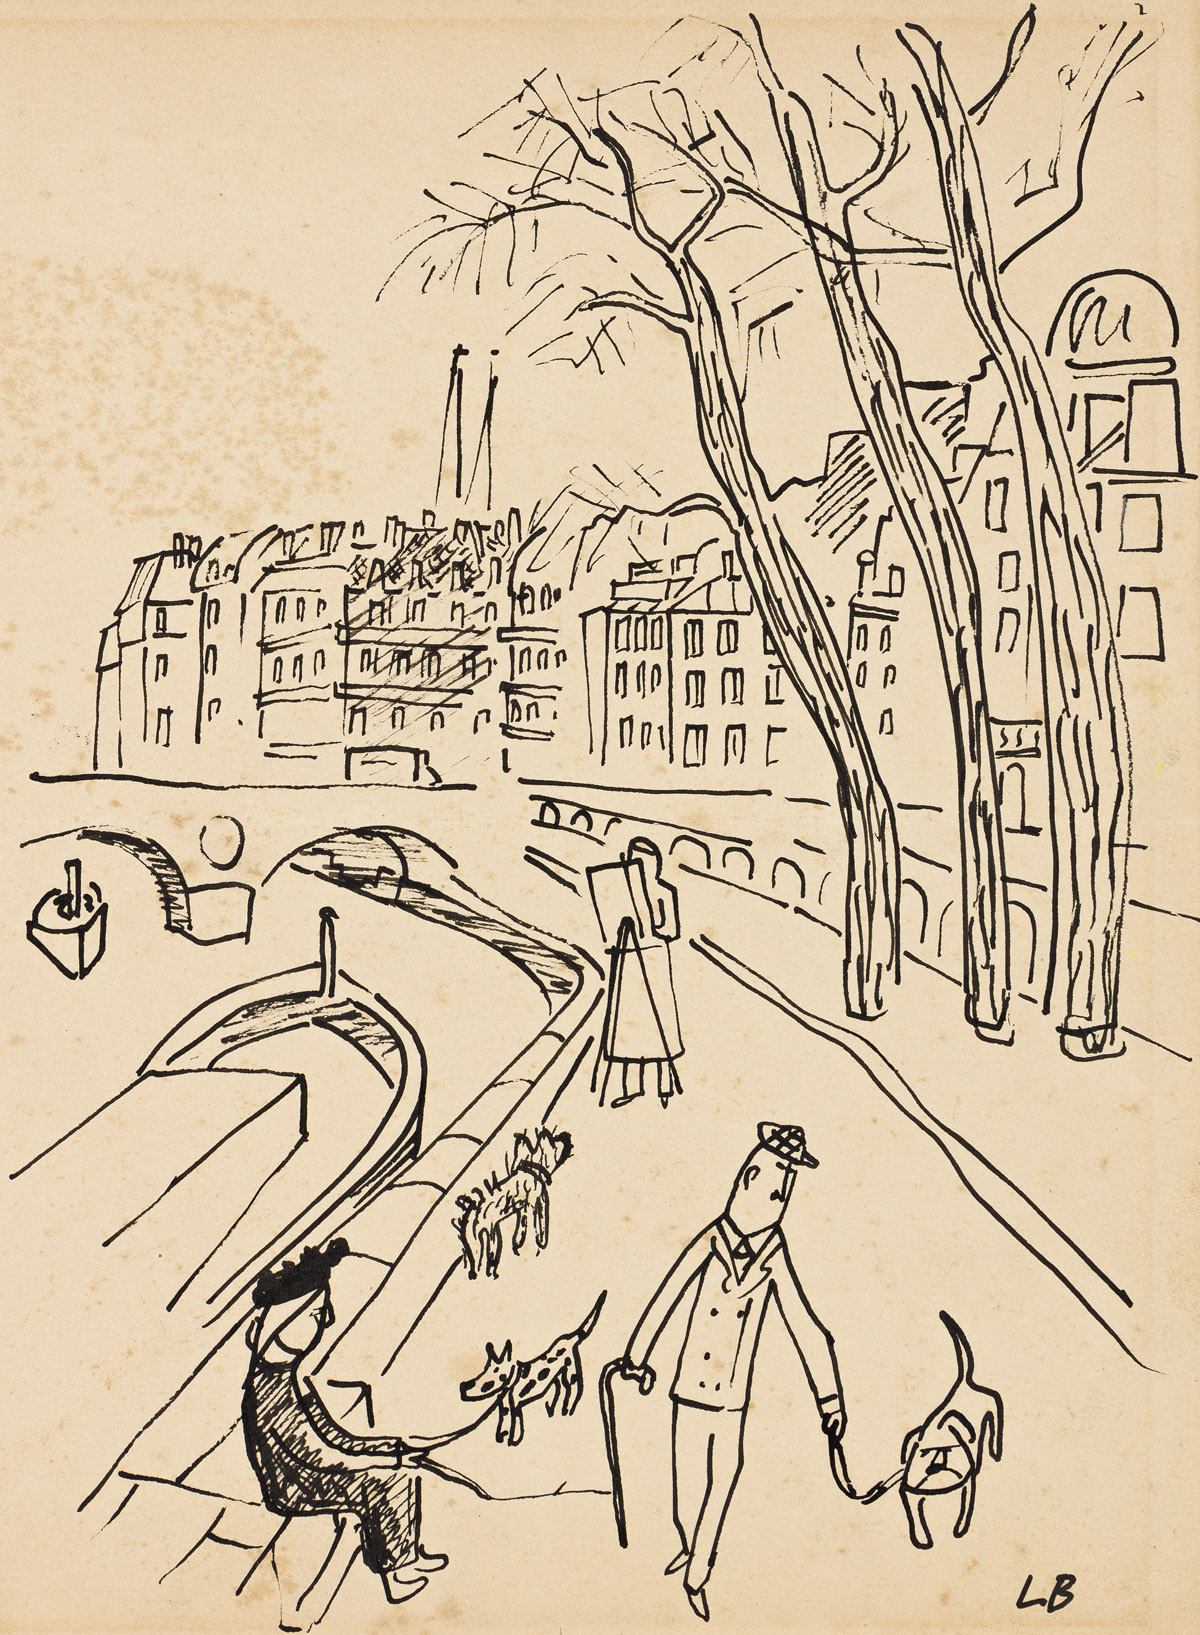 LUDWIG BEMELMANS (1898-1962) Along the Riverbank. [NEW YORKER]